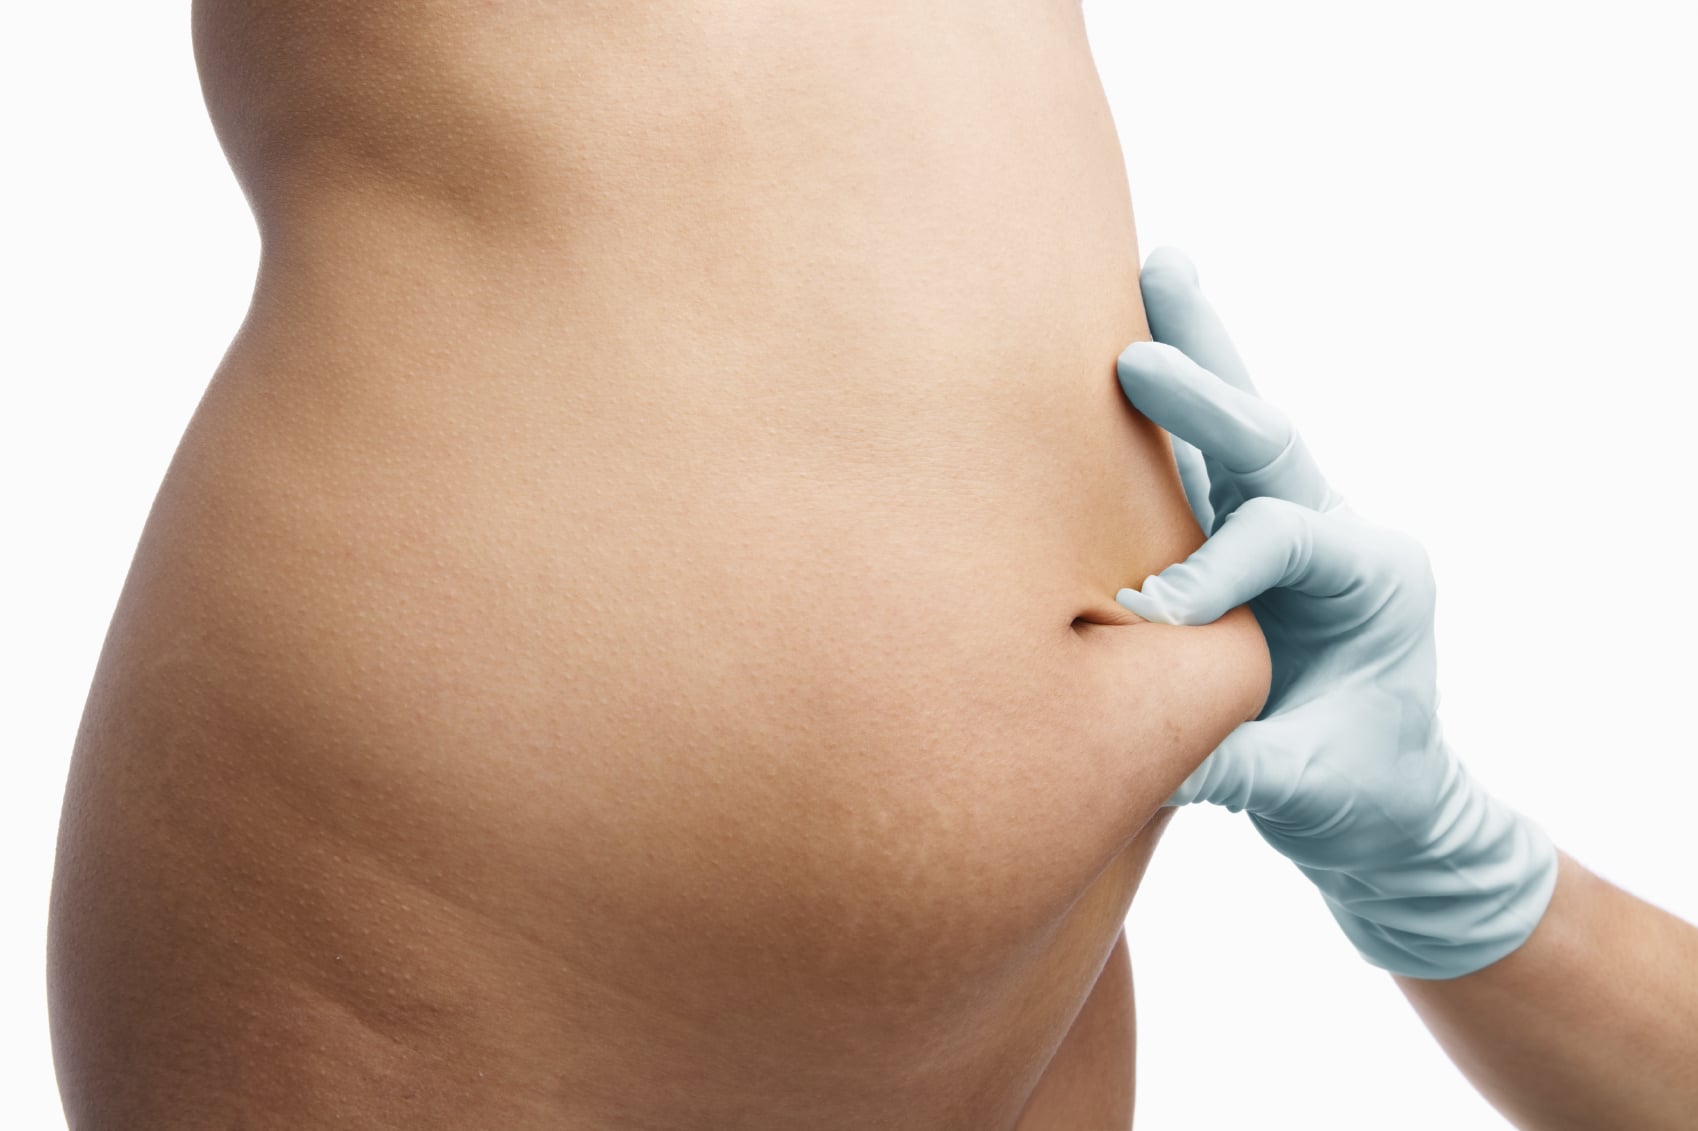 Studies Attempt To Find "Maximum Liposuction Amount" For Body Contouring Patients Newport Beach, CA